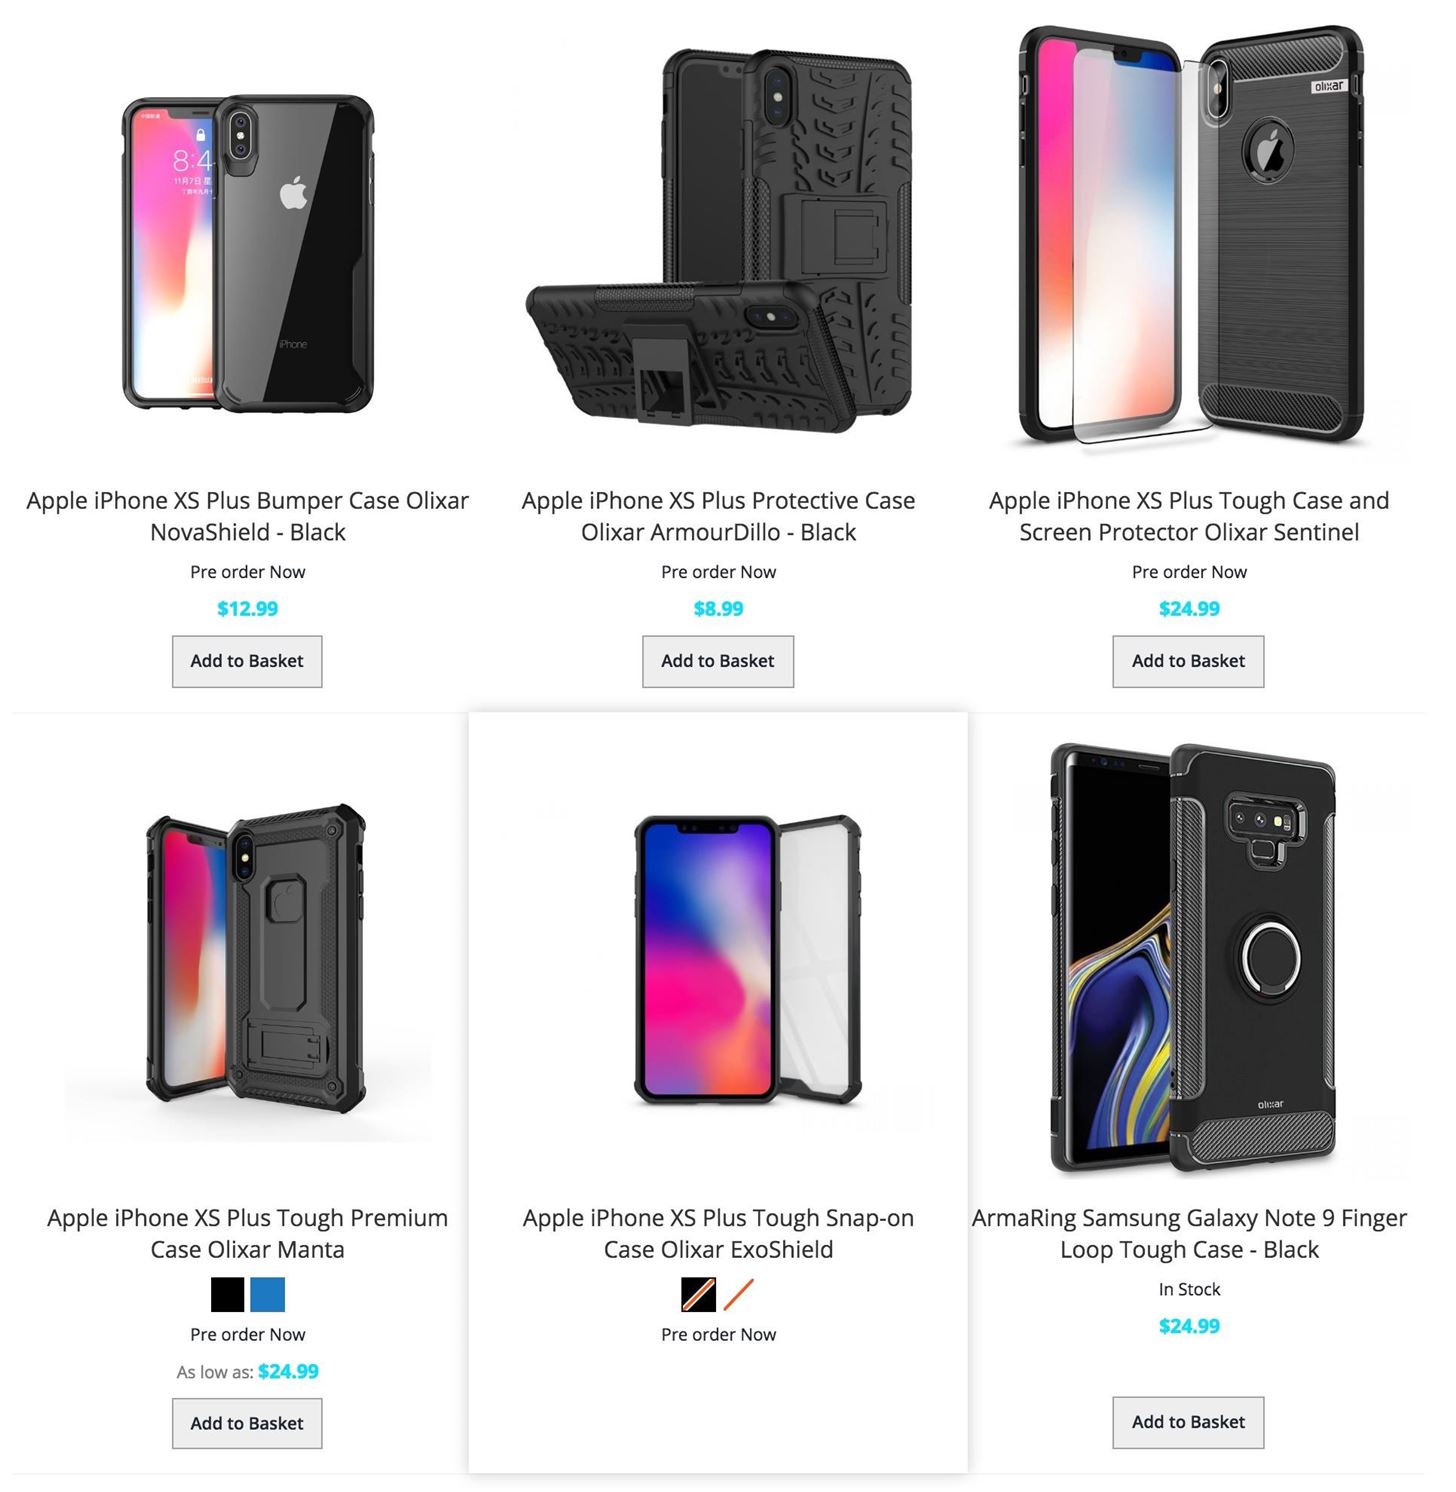 Case Makers Are Ready for the New iPhone XR, XS & XS Max with Buy & Preorder Pages Live Right Now